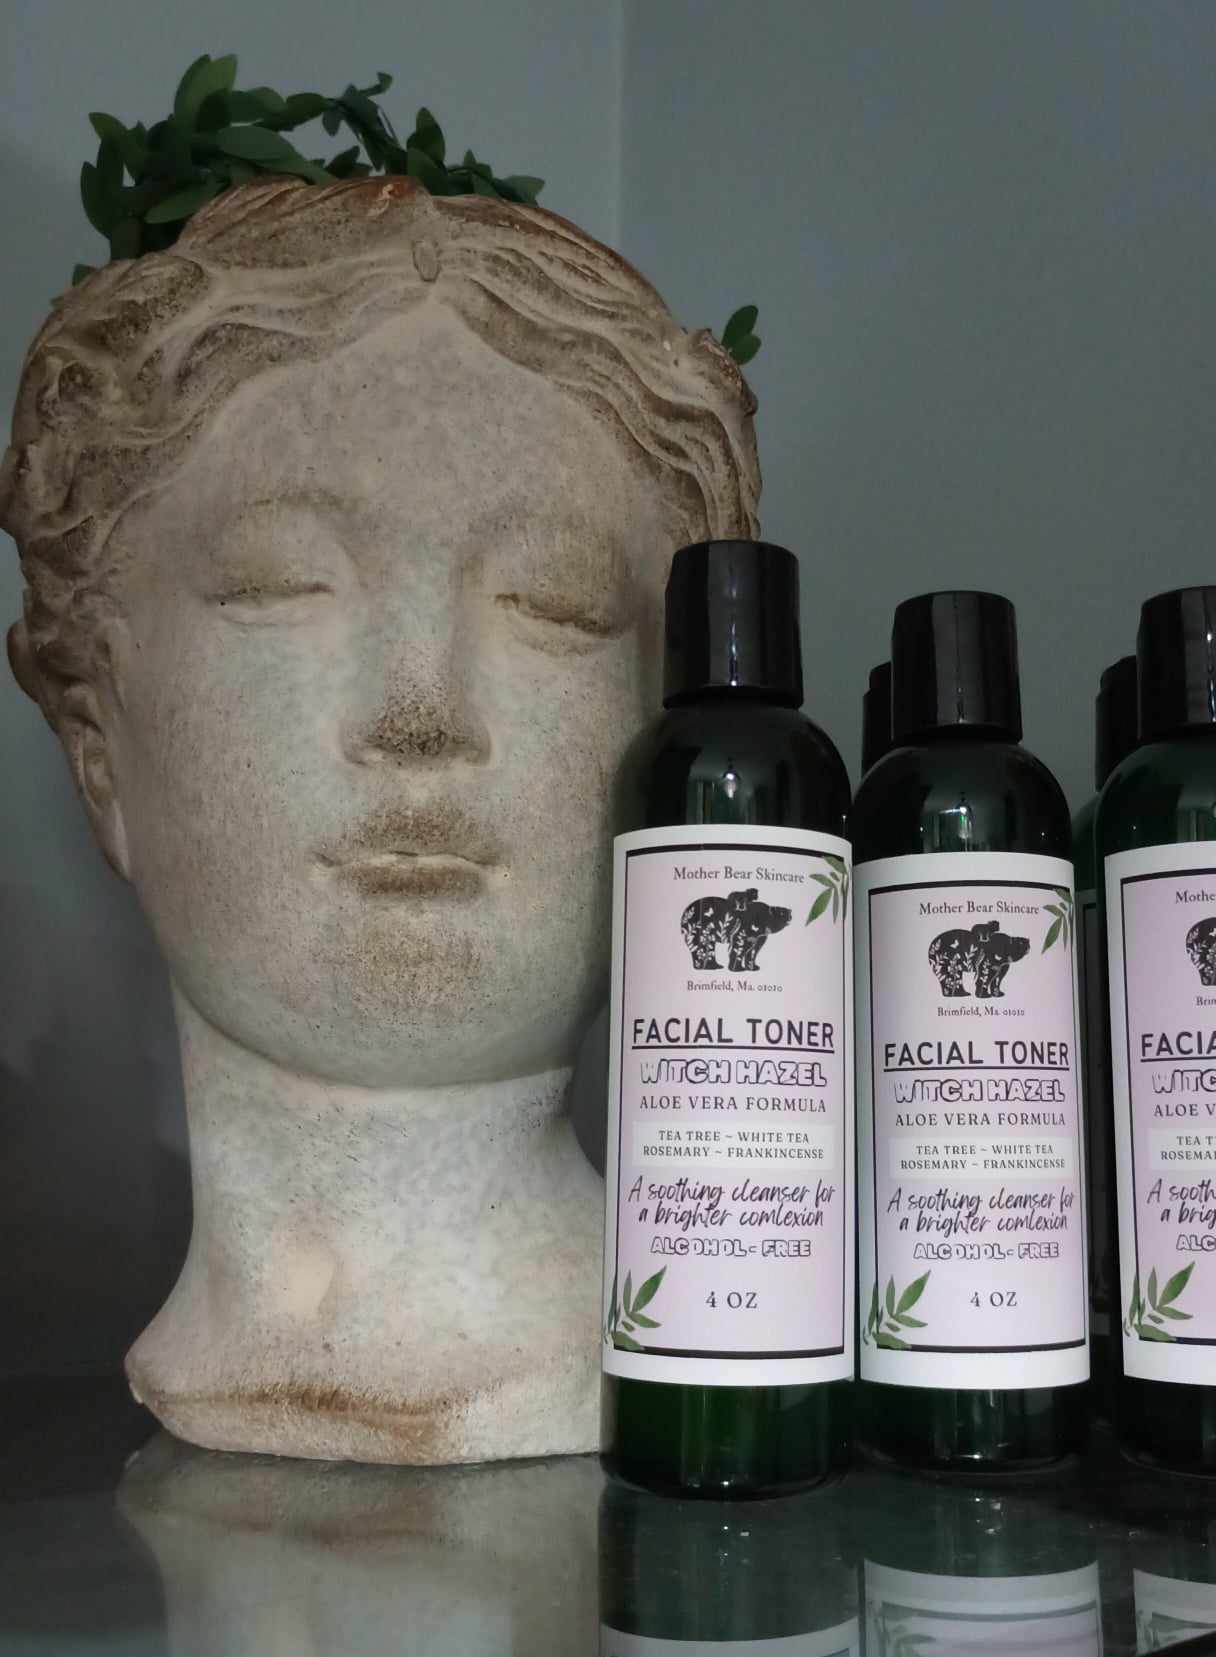 All Natural Facial Toner, Alcohol Free Witch Hazel, Aloe Vera, Natural Cleanser, Hydrating, All Skin Types